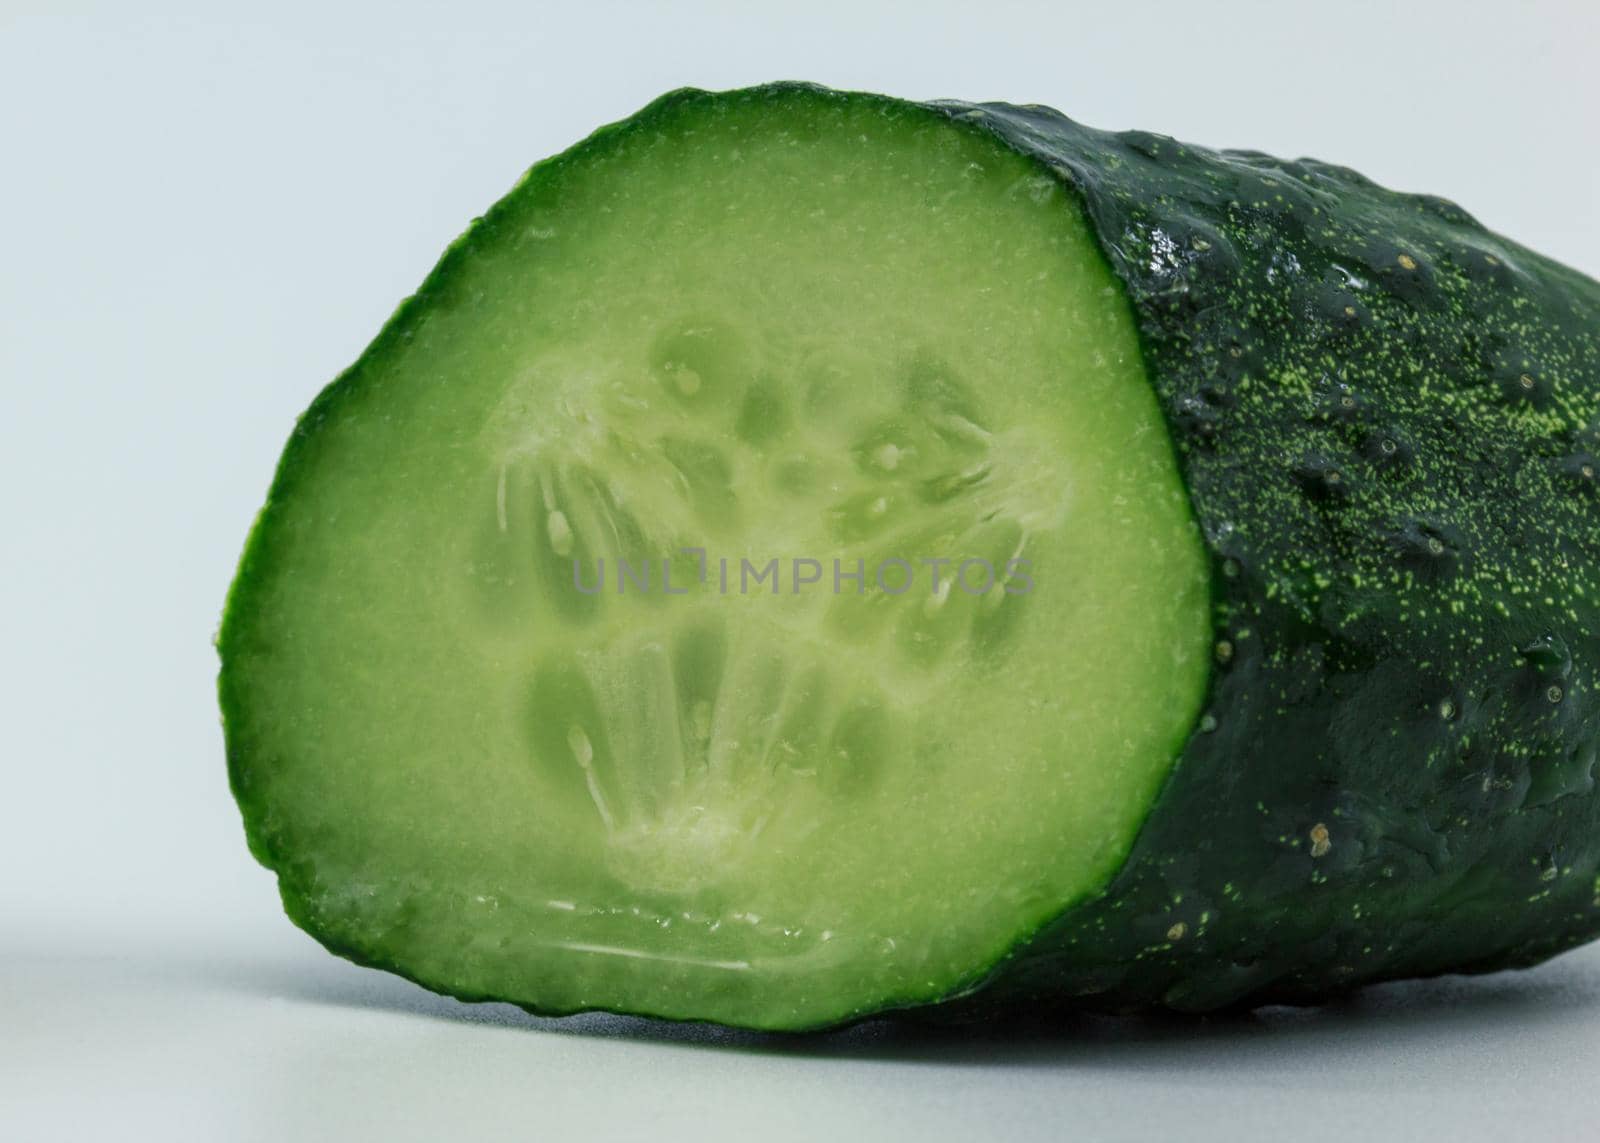 Green wet cucumber half piece of vegetable, inside macro view, white background